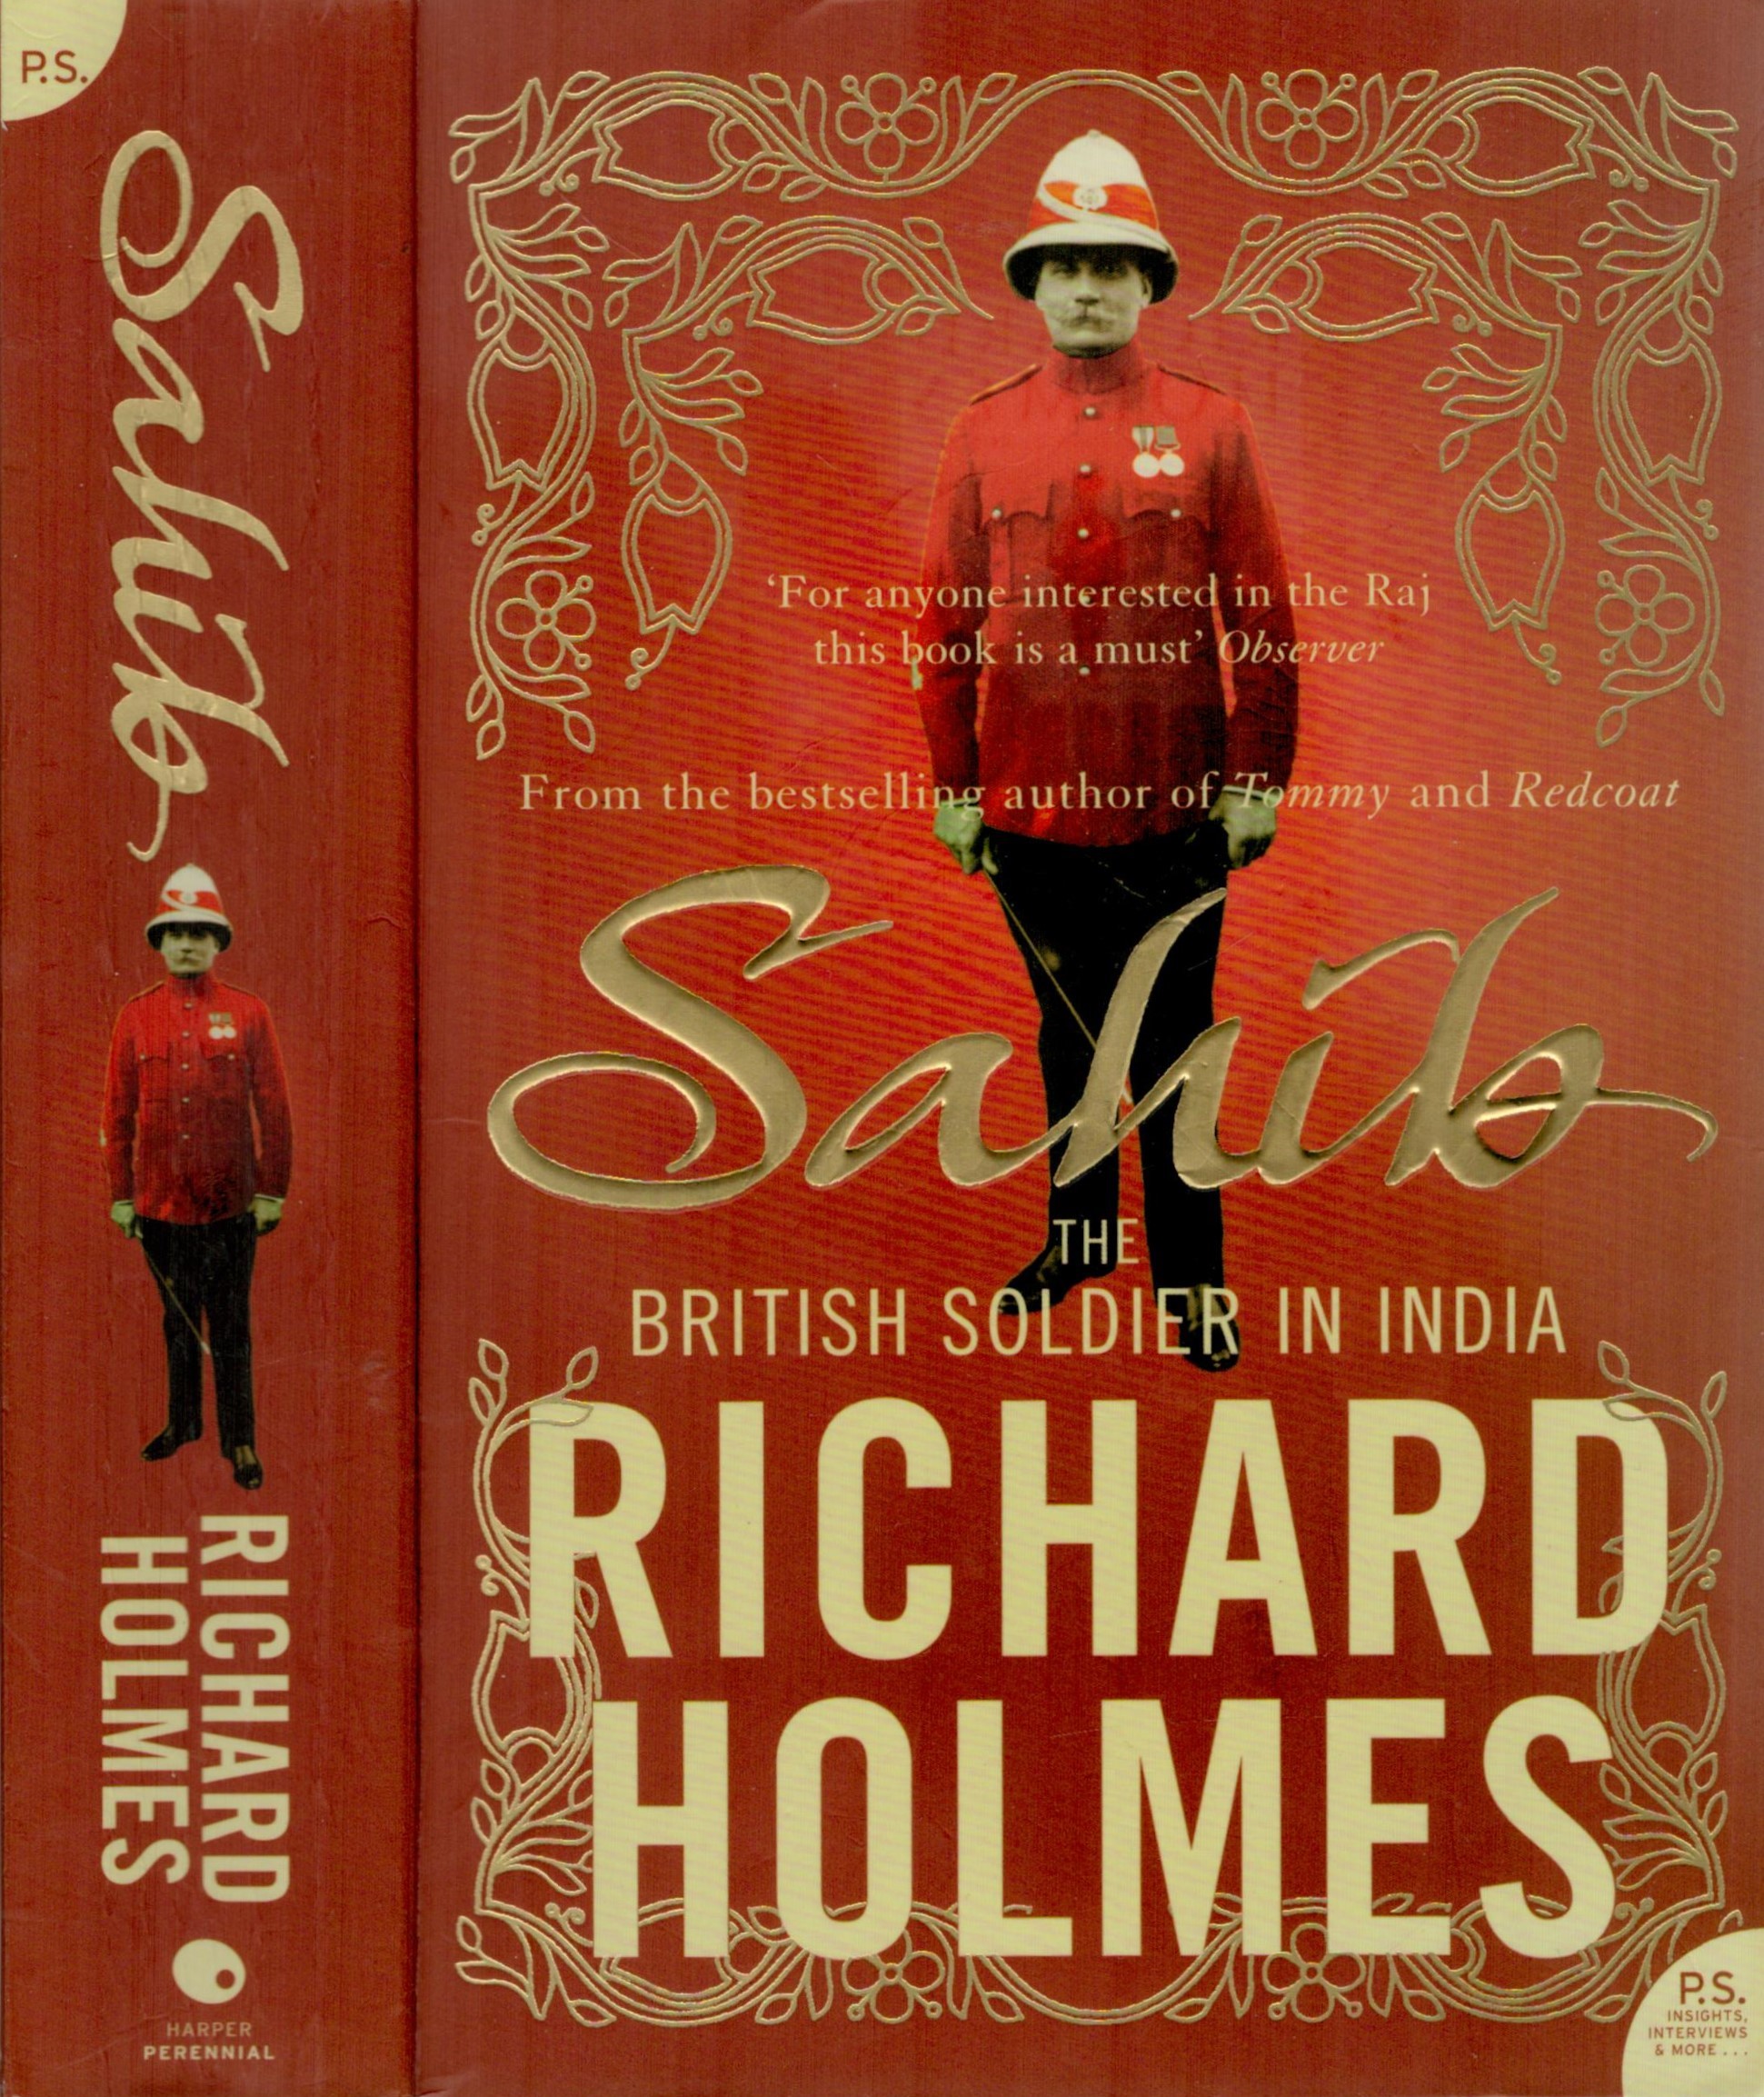 SAHIB The British Soldier In India 1750-1914 Signed by Author Richard Holmes Paperback book. - Image 2 of 6